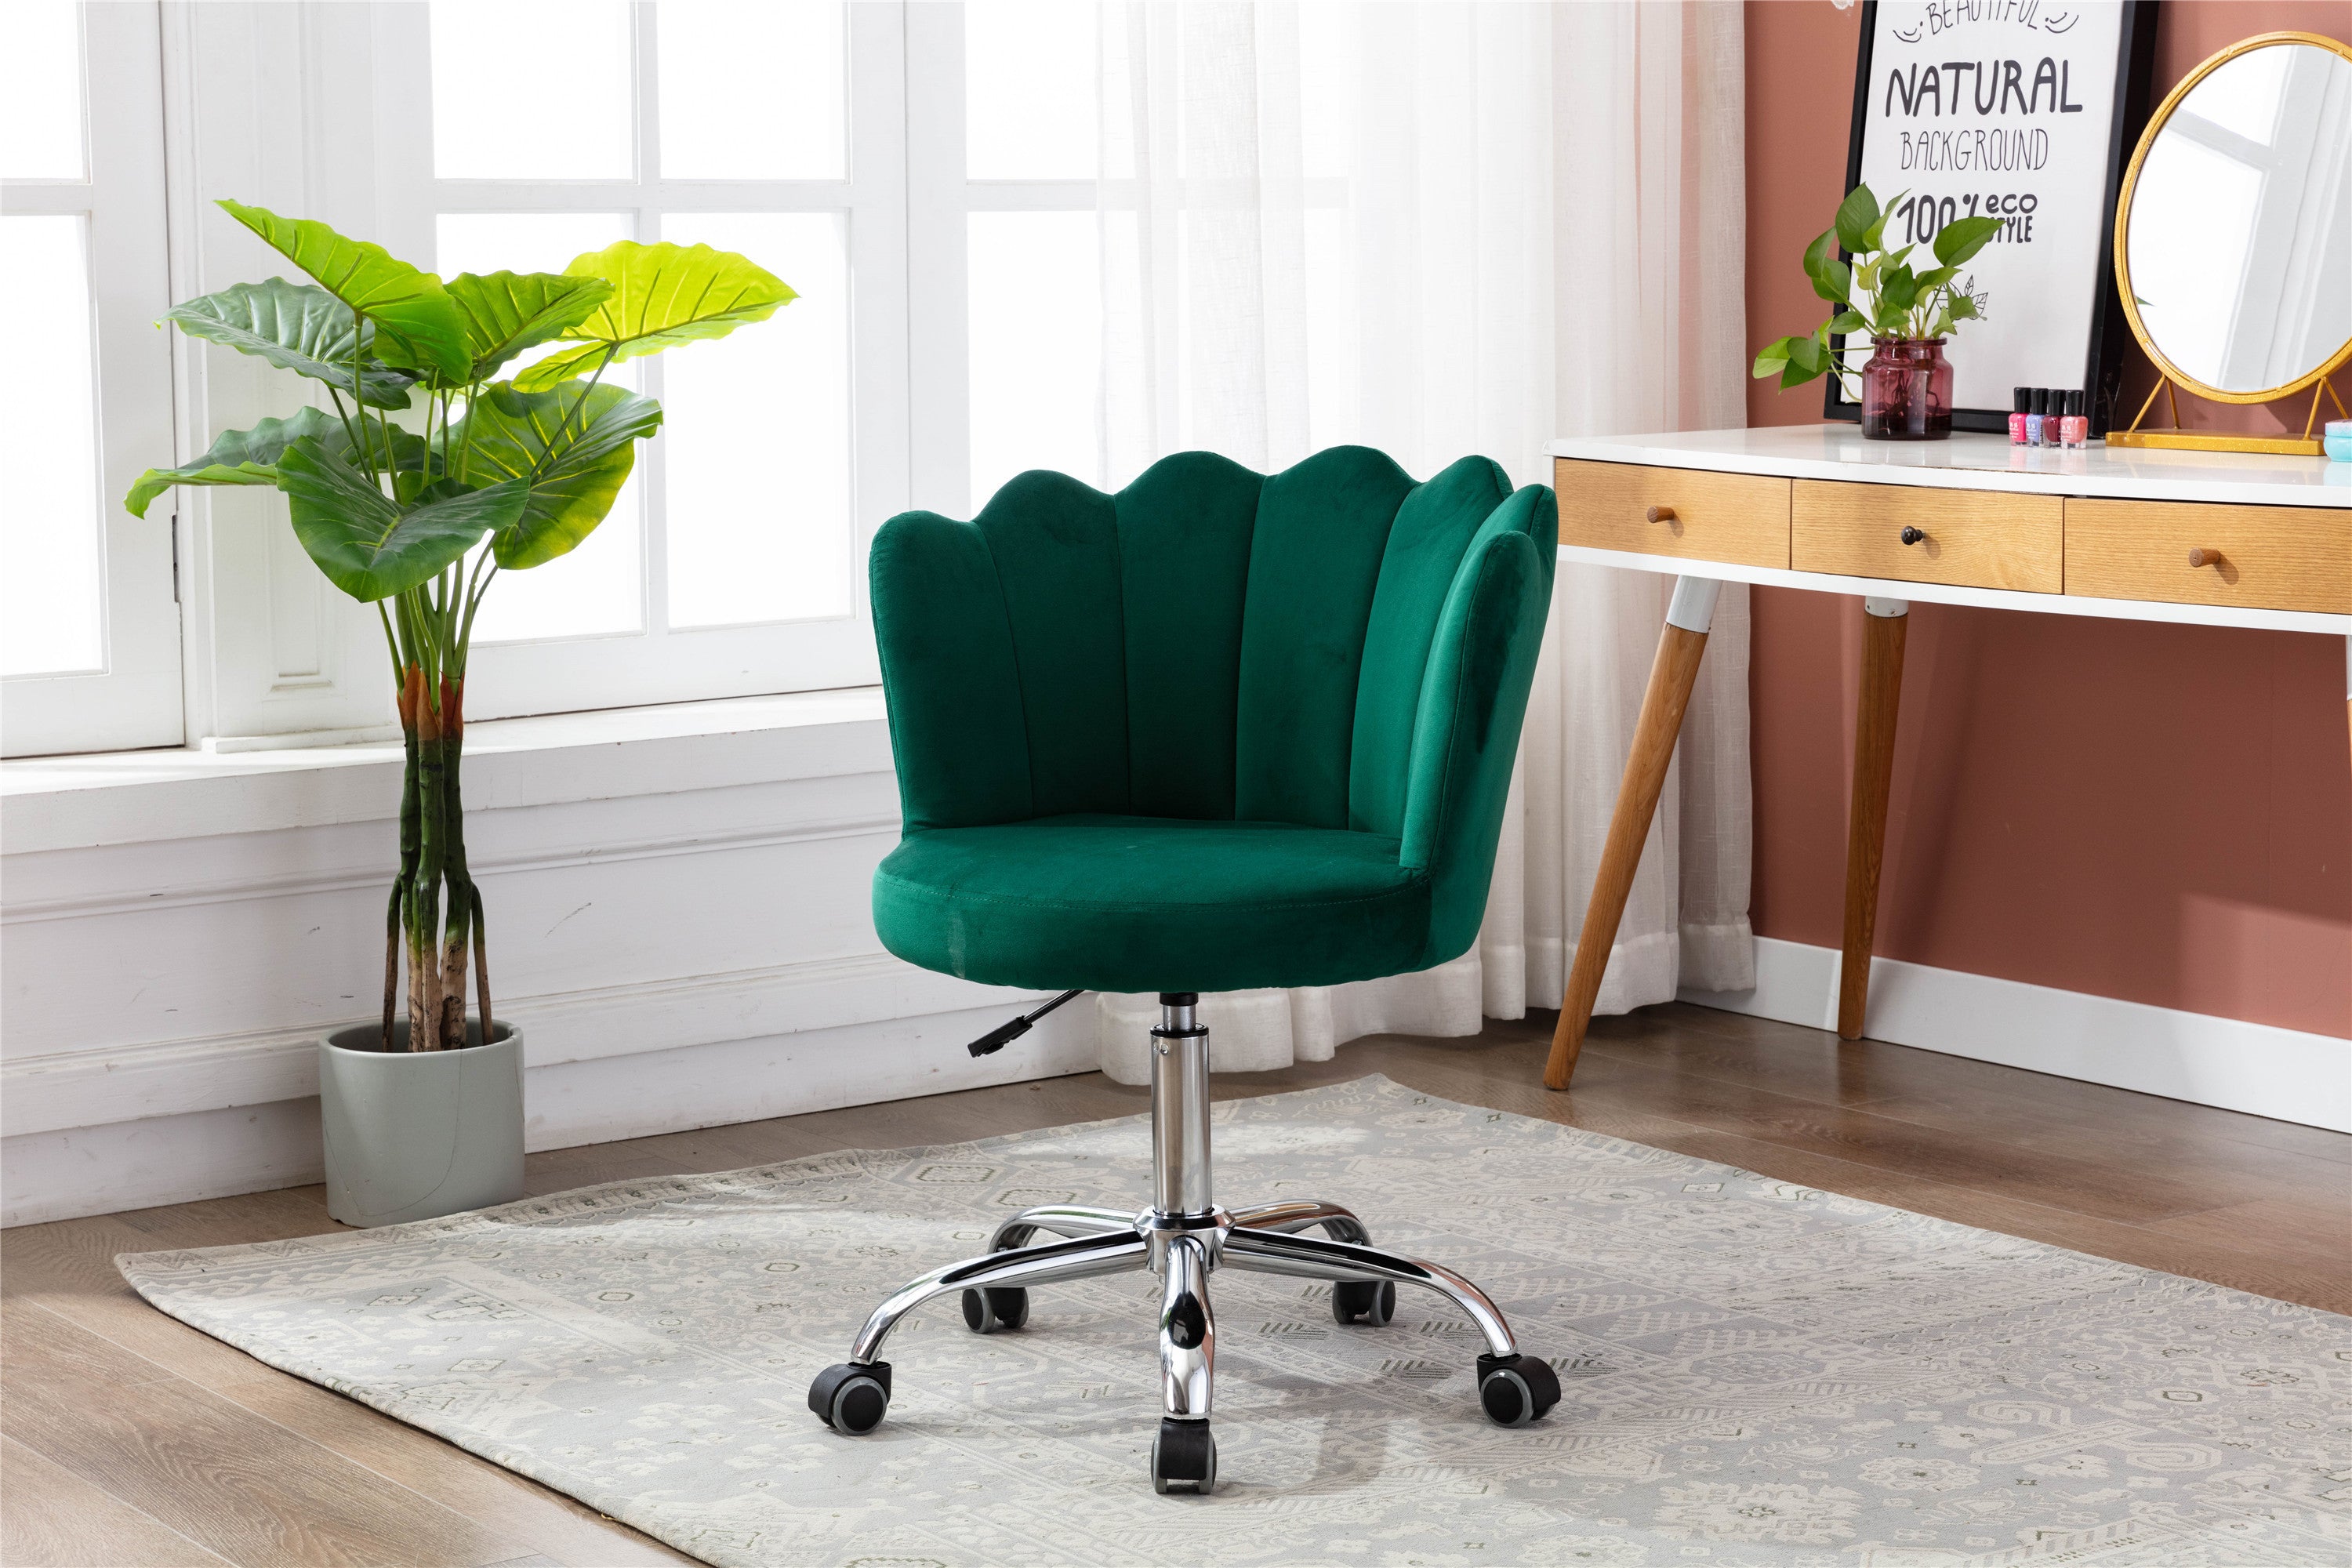 COOLMORE Modern Leisure Office Chair (Green)